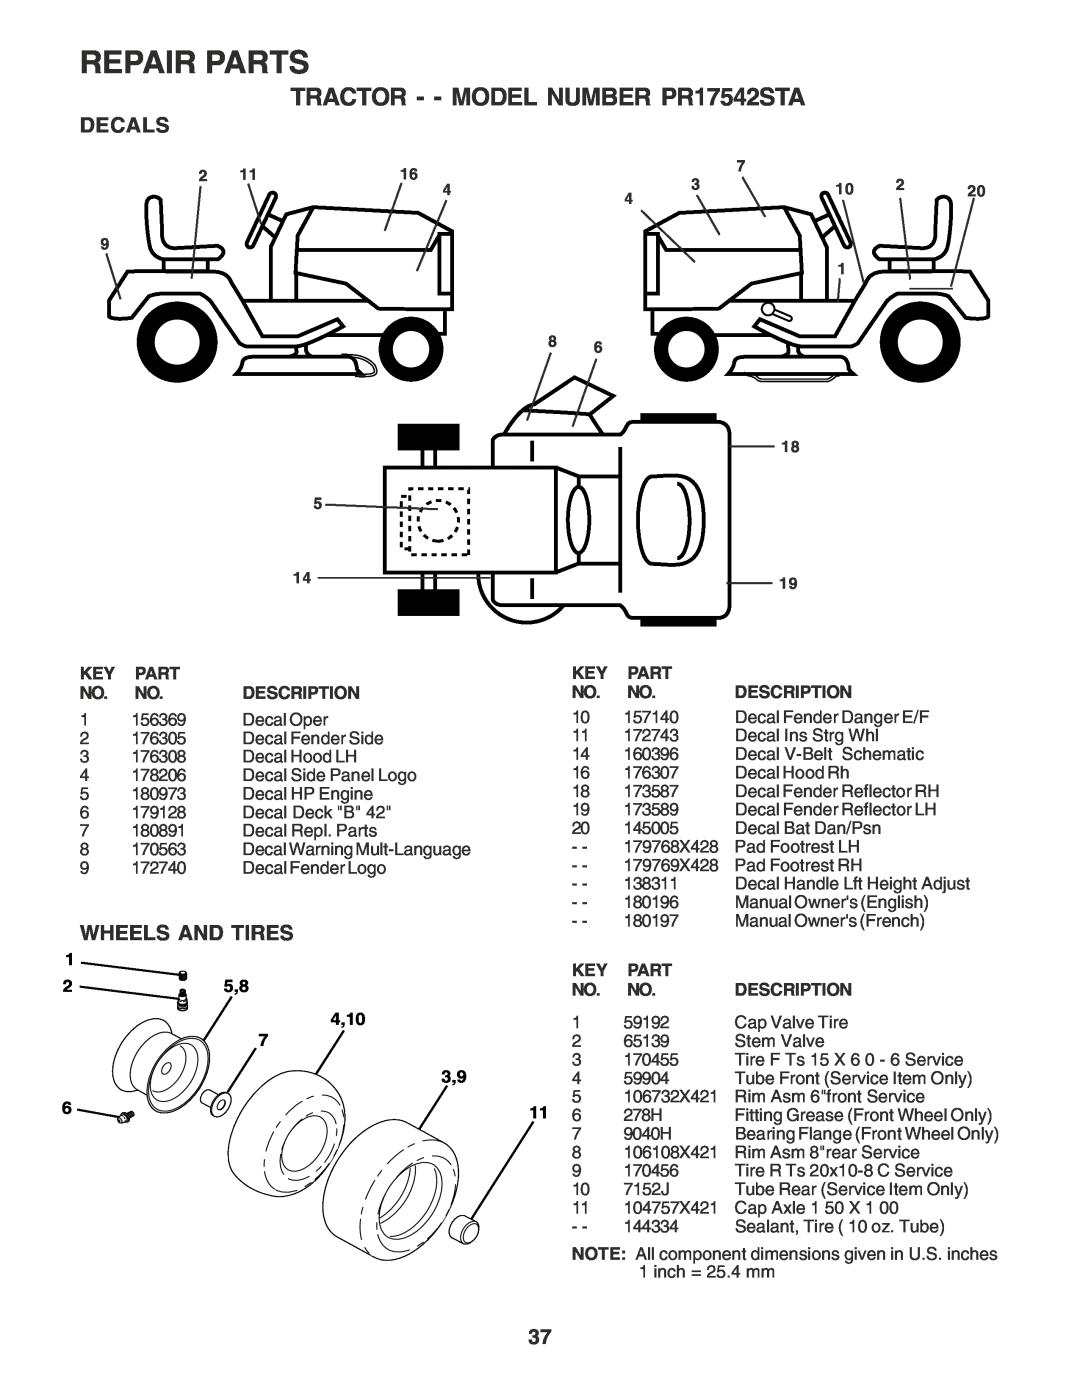 Poulan 180196 owner manual Decals, Wheels And Tires, Repair Parts, TRACTOR - - MODEL NUMBER PR17542STA, Description, 4,10 